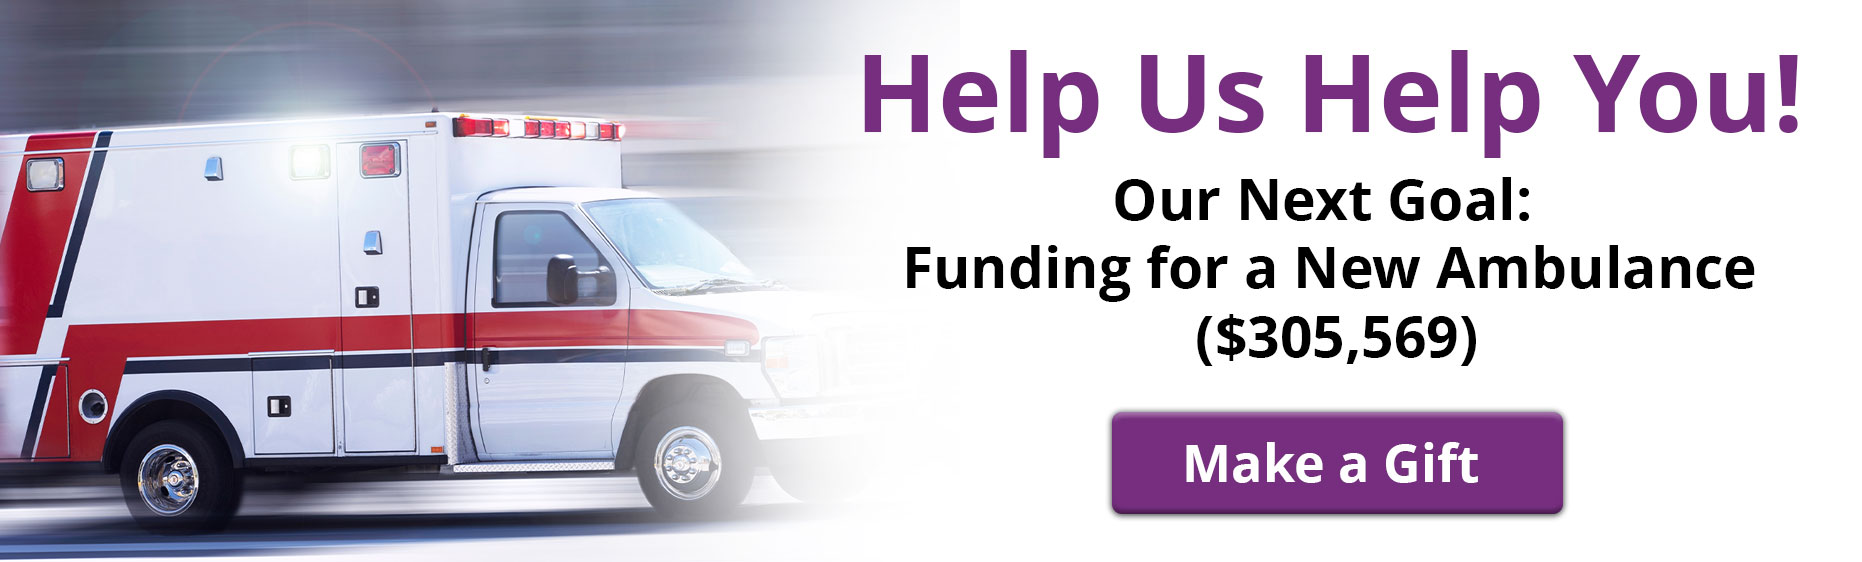 Help Us Help You!

Our Next Goal: Funding for a New Ambulance ($305,569)

Make a Gift